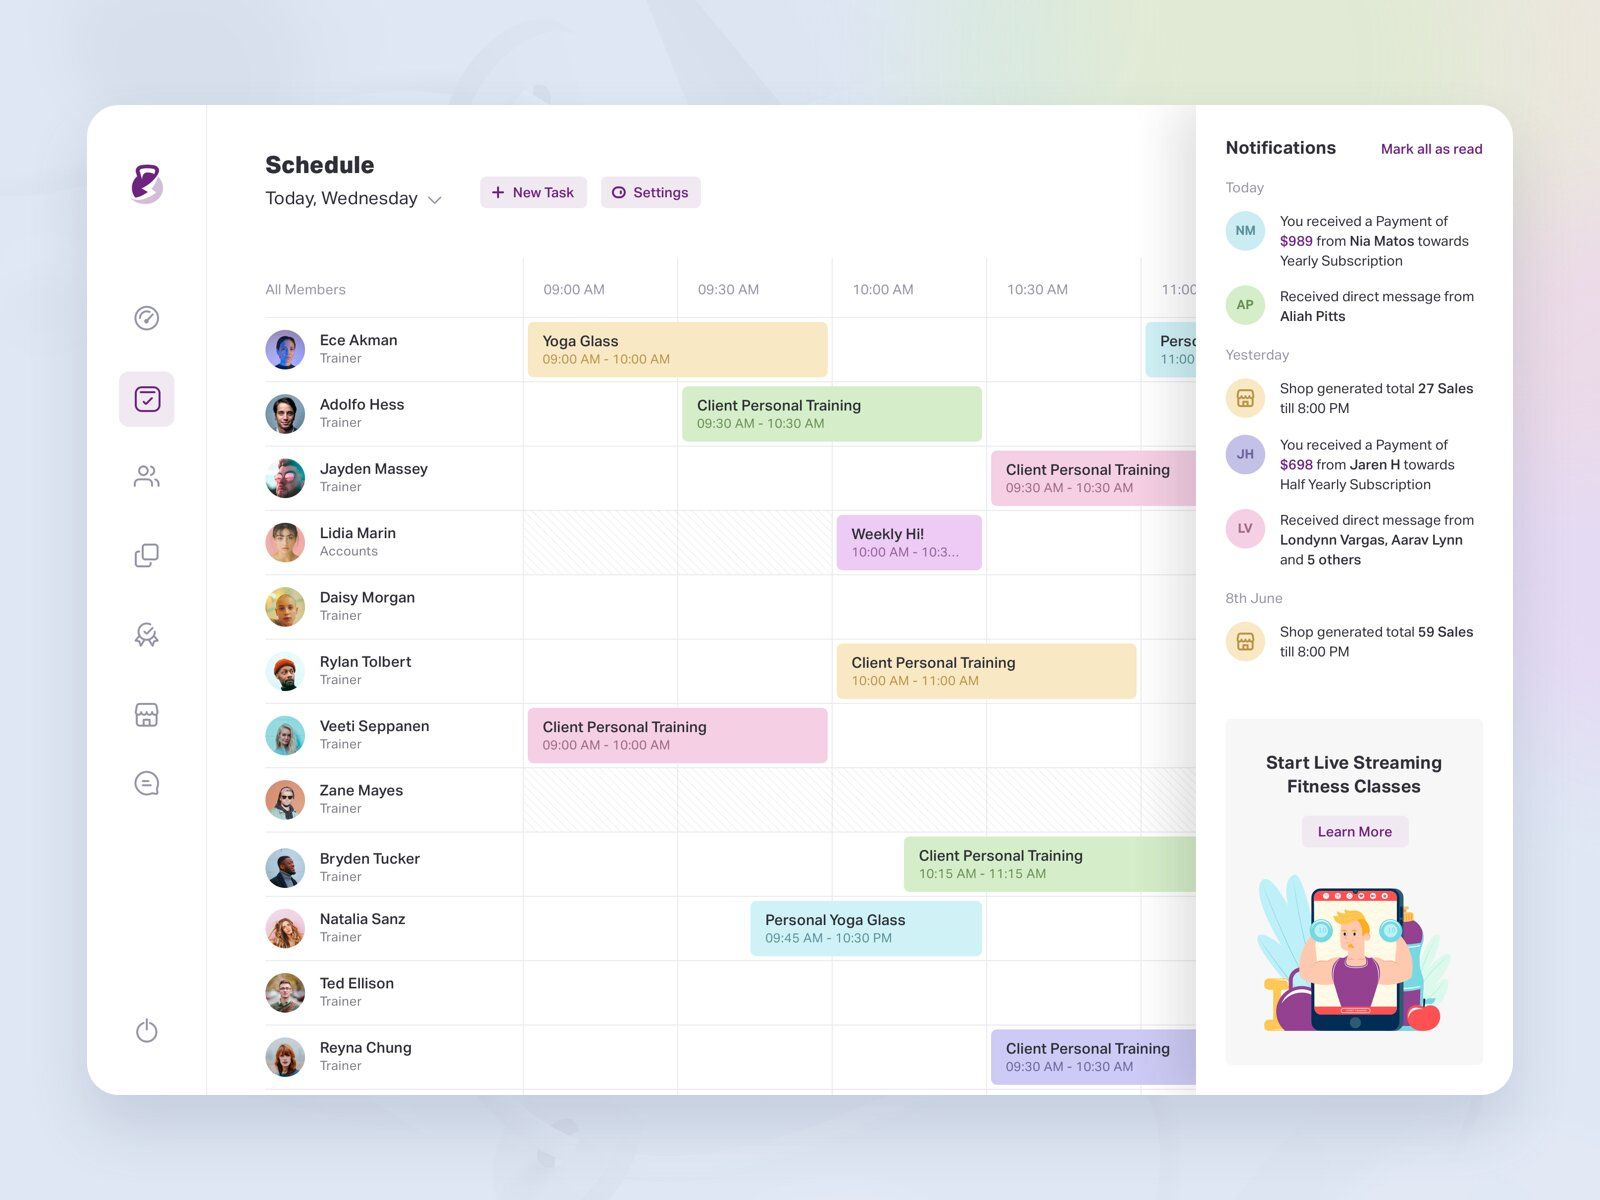 Fitness management software helps streamline all your internal processes and get even more from them (*image by [Prakash Ghodke 👋](https://dribbble.com/ghodkester){ rel="nofollow" .default-md}*)